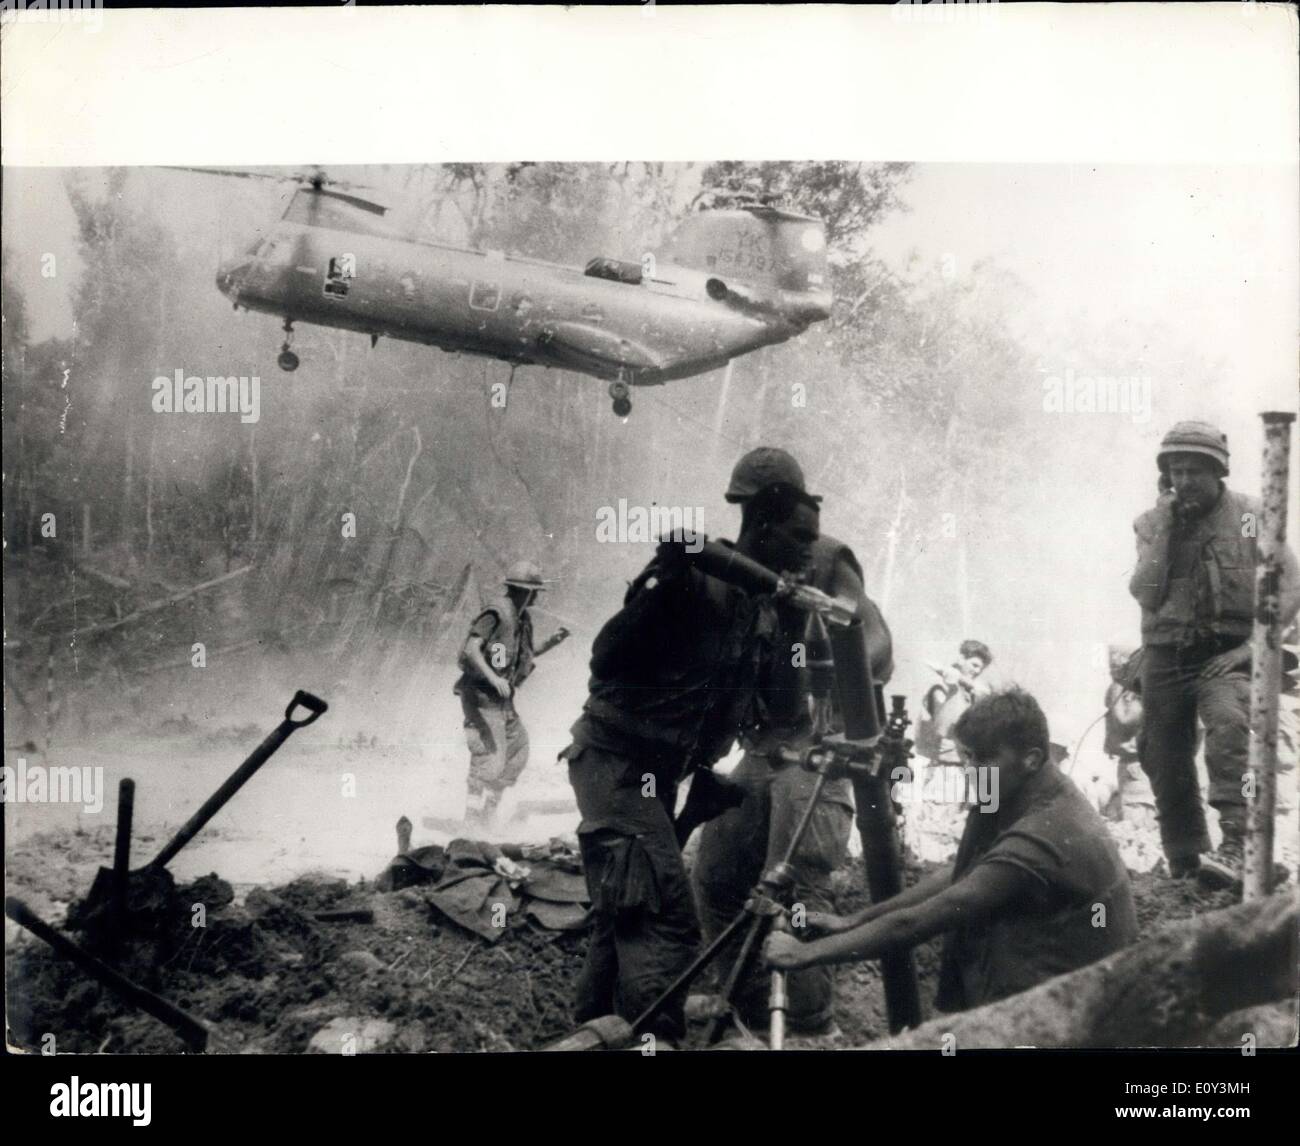 Oct. 07, 1968 - The War In Vietnam Marines In Mortar Battle: This graphic picture from the war in Vietnam, shows American Marines as they opened fore with 8lmm mortars to suppress enemy mortar fire on their position. Behind is a transport helicopter taking off her clear from incoming shells. Stock Photo